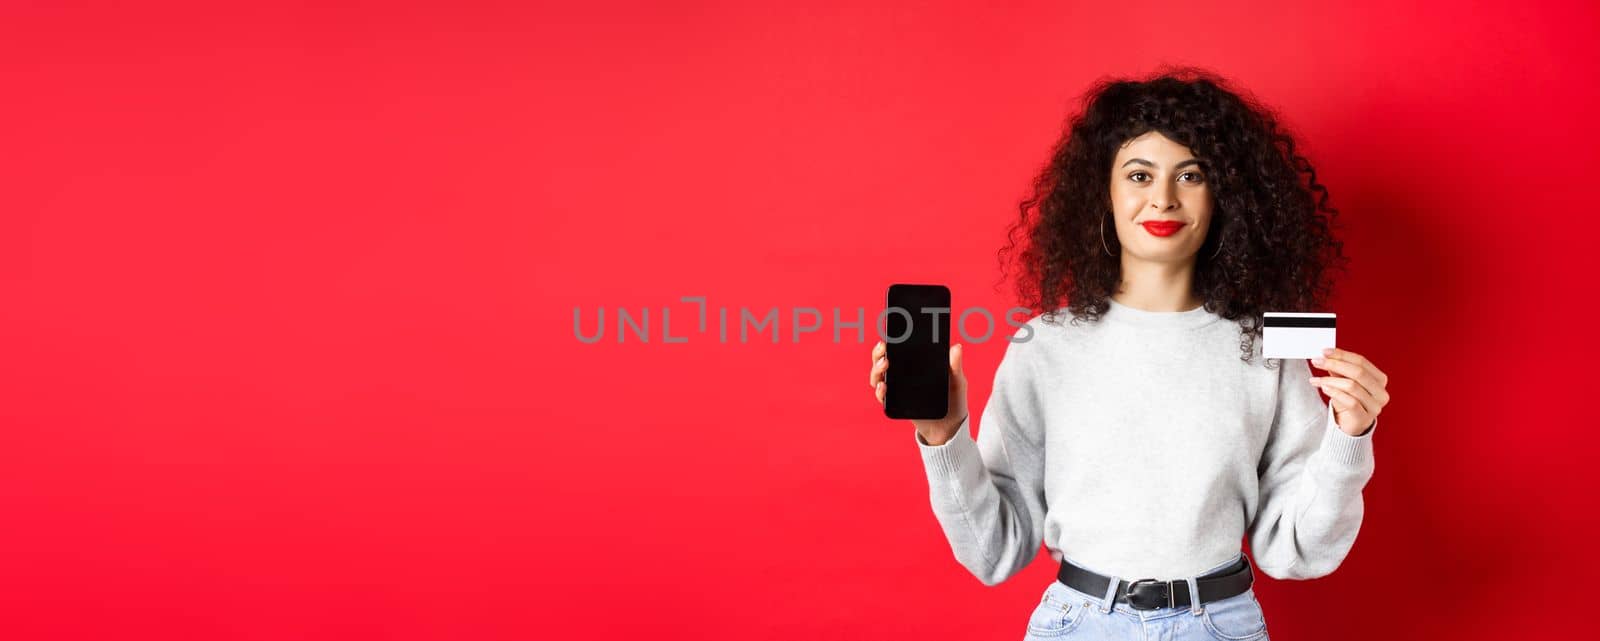 Young modern woman with curly hair showing plastic credit card and mobile phone screen, demonstrating online shopping app, standing on red background.